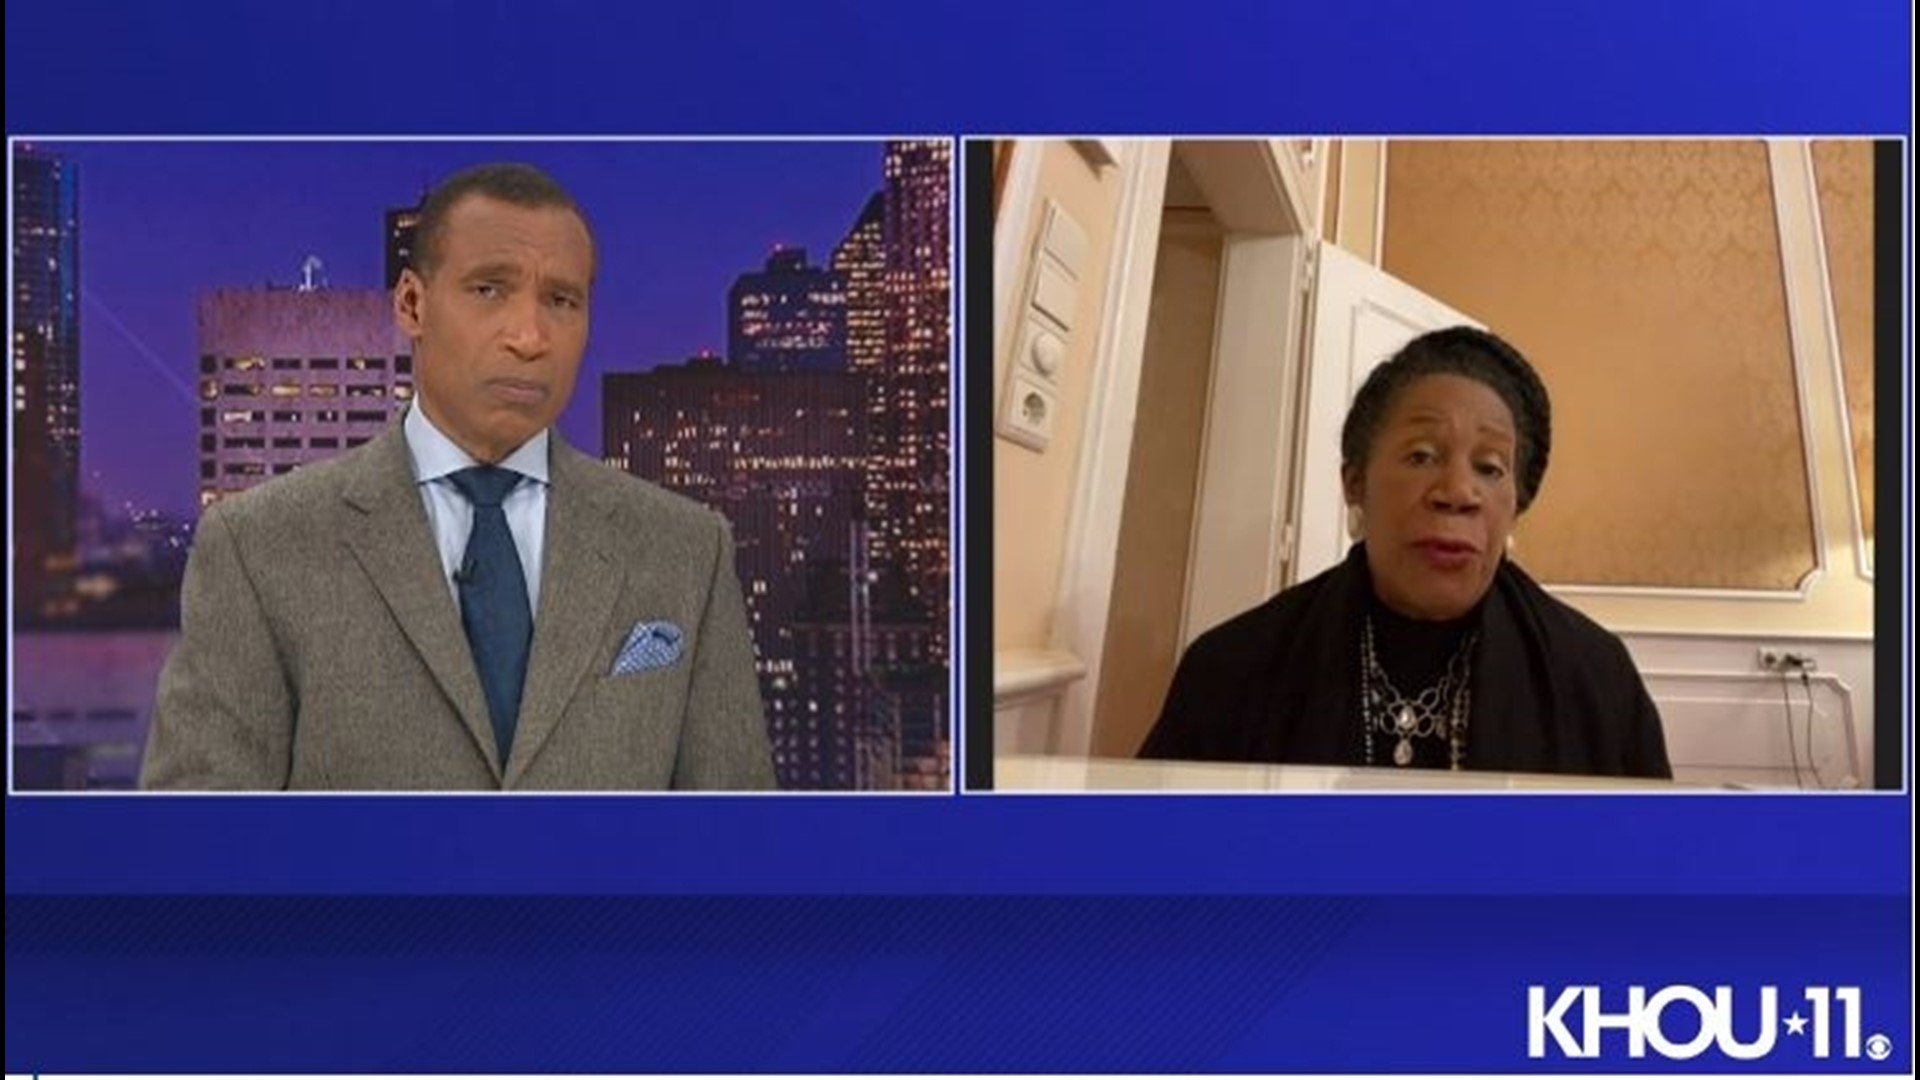 This is the full interview KHOU 11 anchor Len Cannon had with Rep. Sheila Jackson Lee on Thursday, Feb. 24.